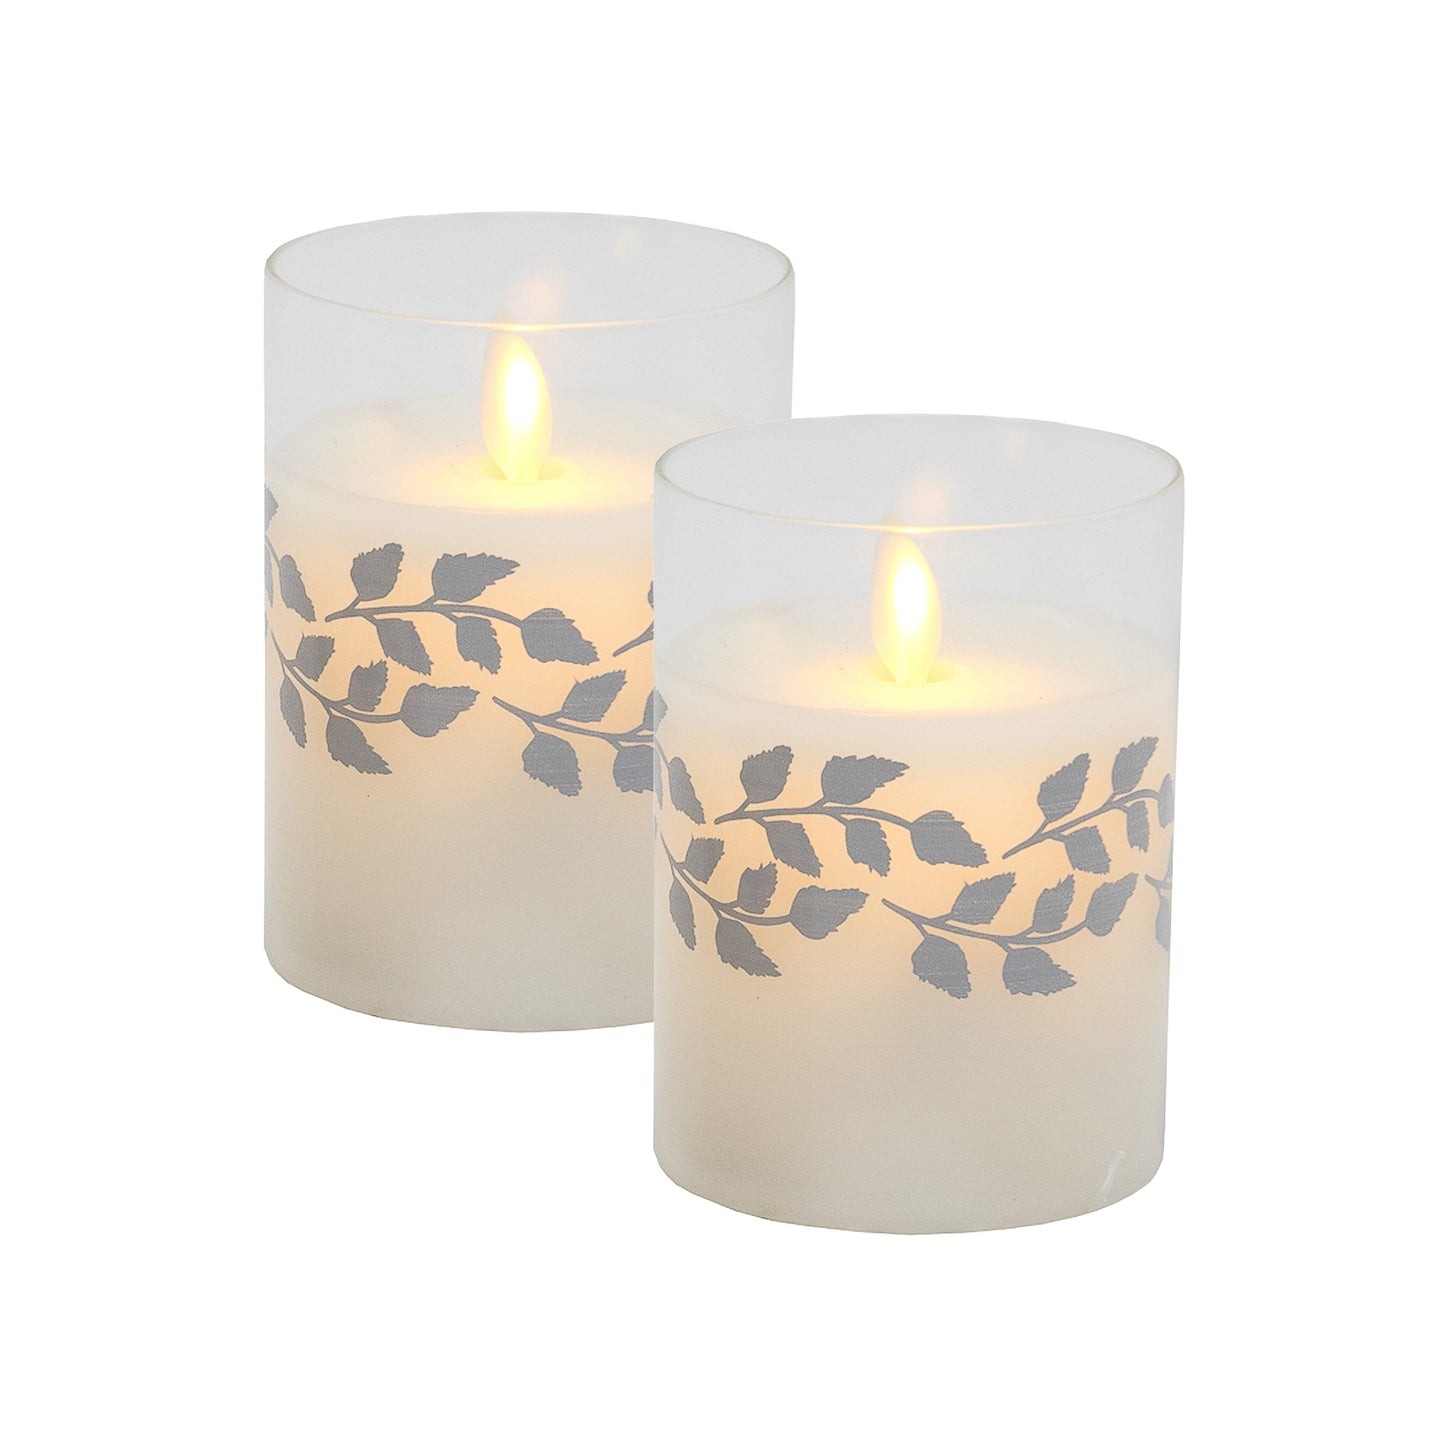 Battery Operated LED Glass Candles with Flickering Flame, Gold Garland - Set of 2 - Silver